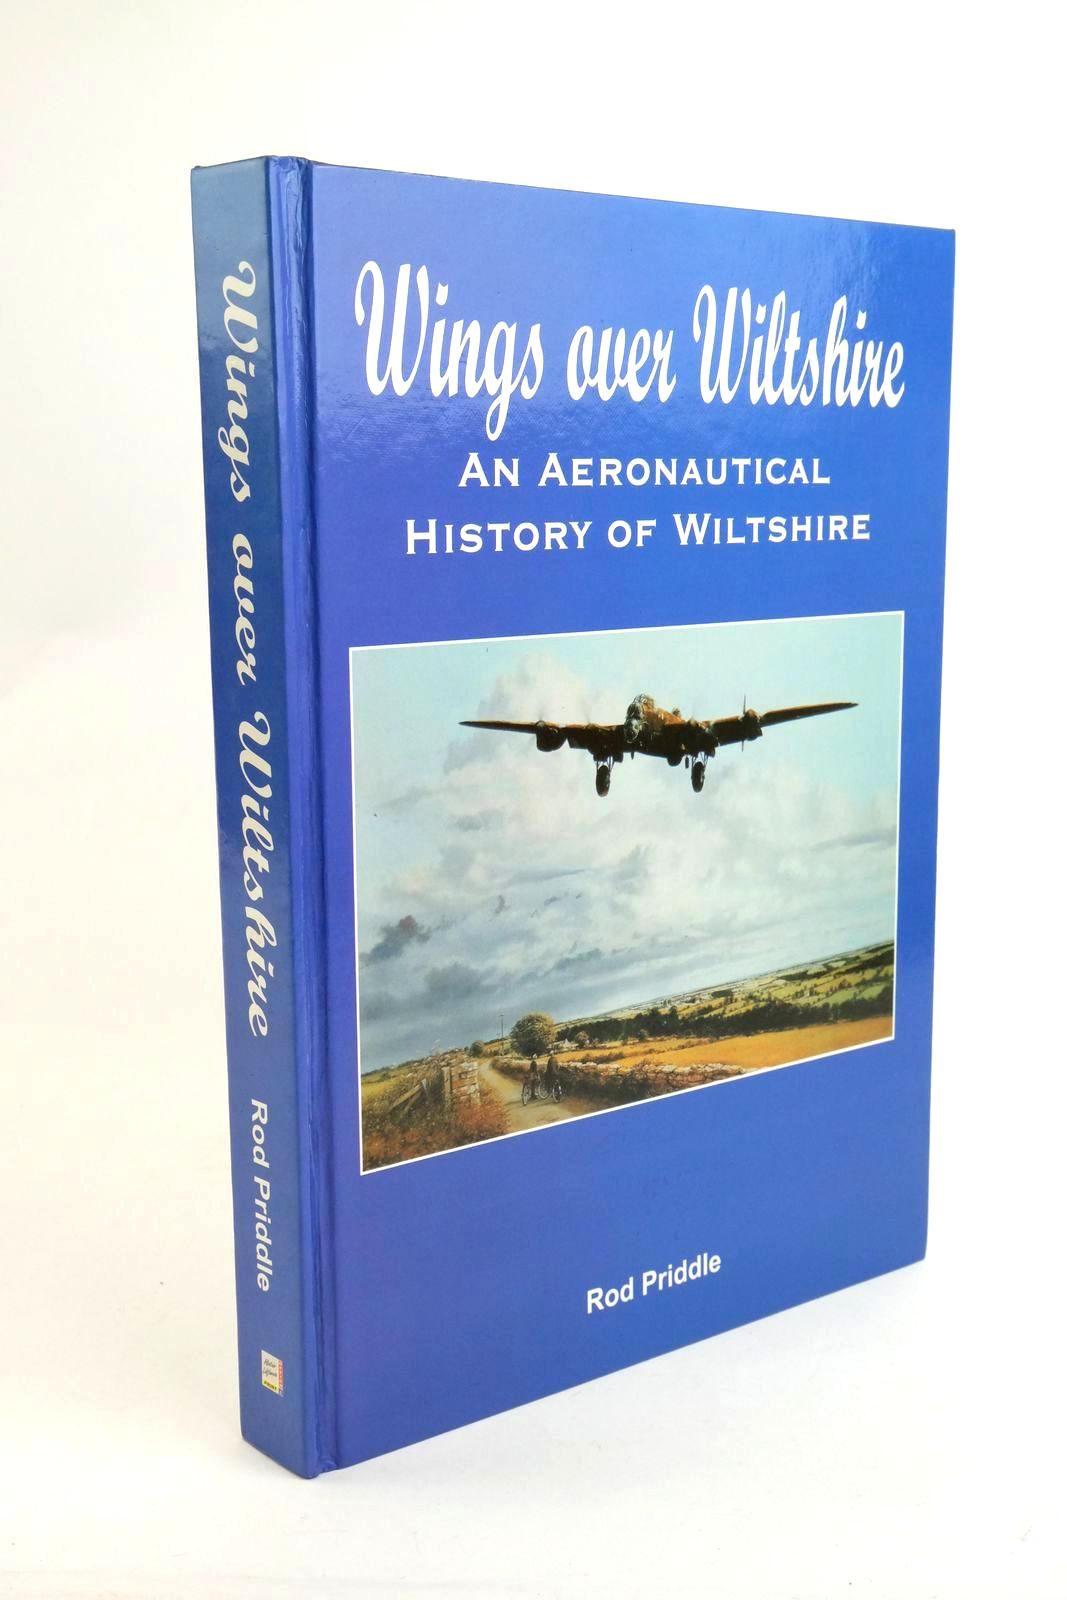 Photo of WINGS OVER WILTSHIRE written by Priddle, Rod published by ALD Design & Print (STOCK CODE: 1322184)  for sale by Stella & Rose's Books